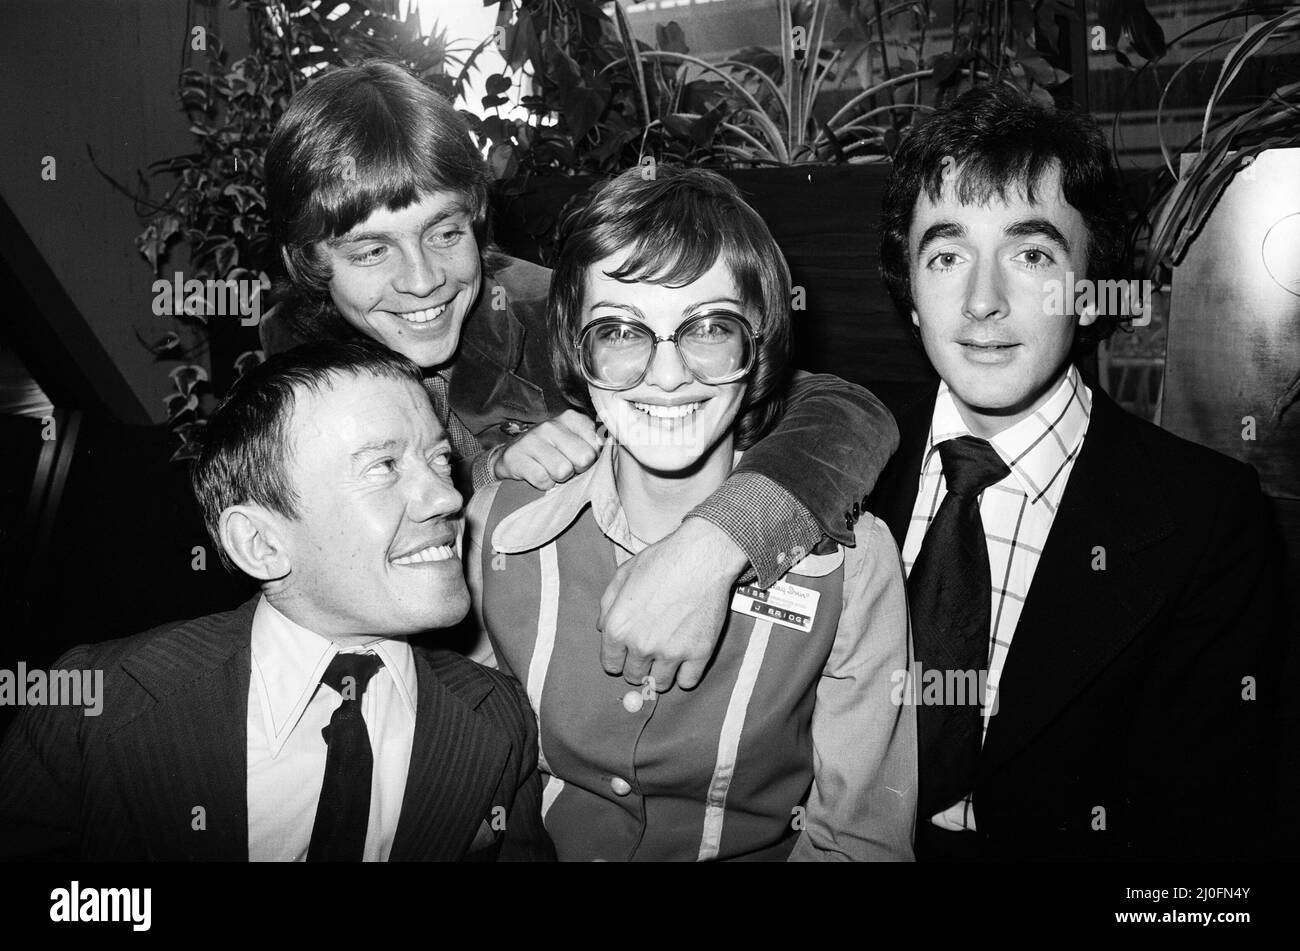 Stars of new film, Star Wars, attend news press conference at the Holiday Inn Hotel in Birmingham, 25th January 1978. Mark Hamill plays Luke Skywalker, Kenny Baker plays R2-D2 and Anthony Daniels plays C-3PO. Stock Photo